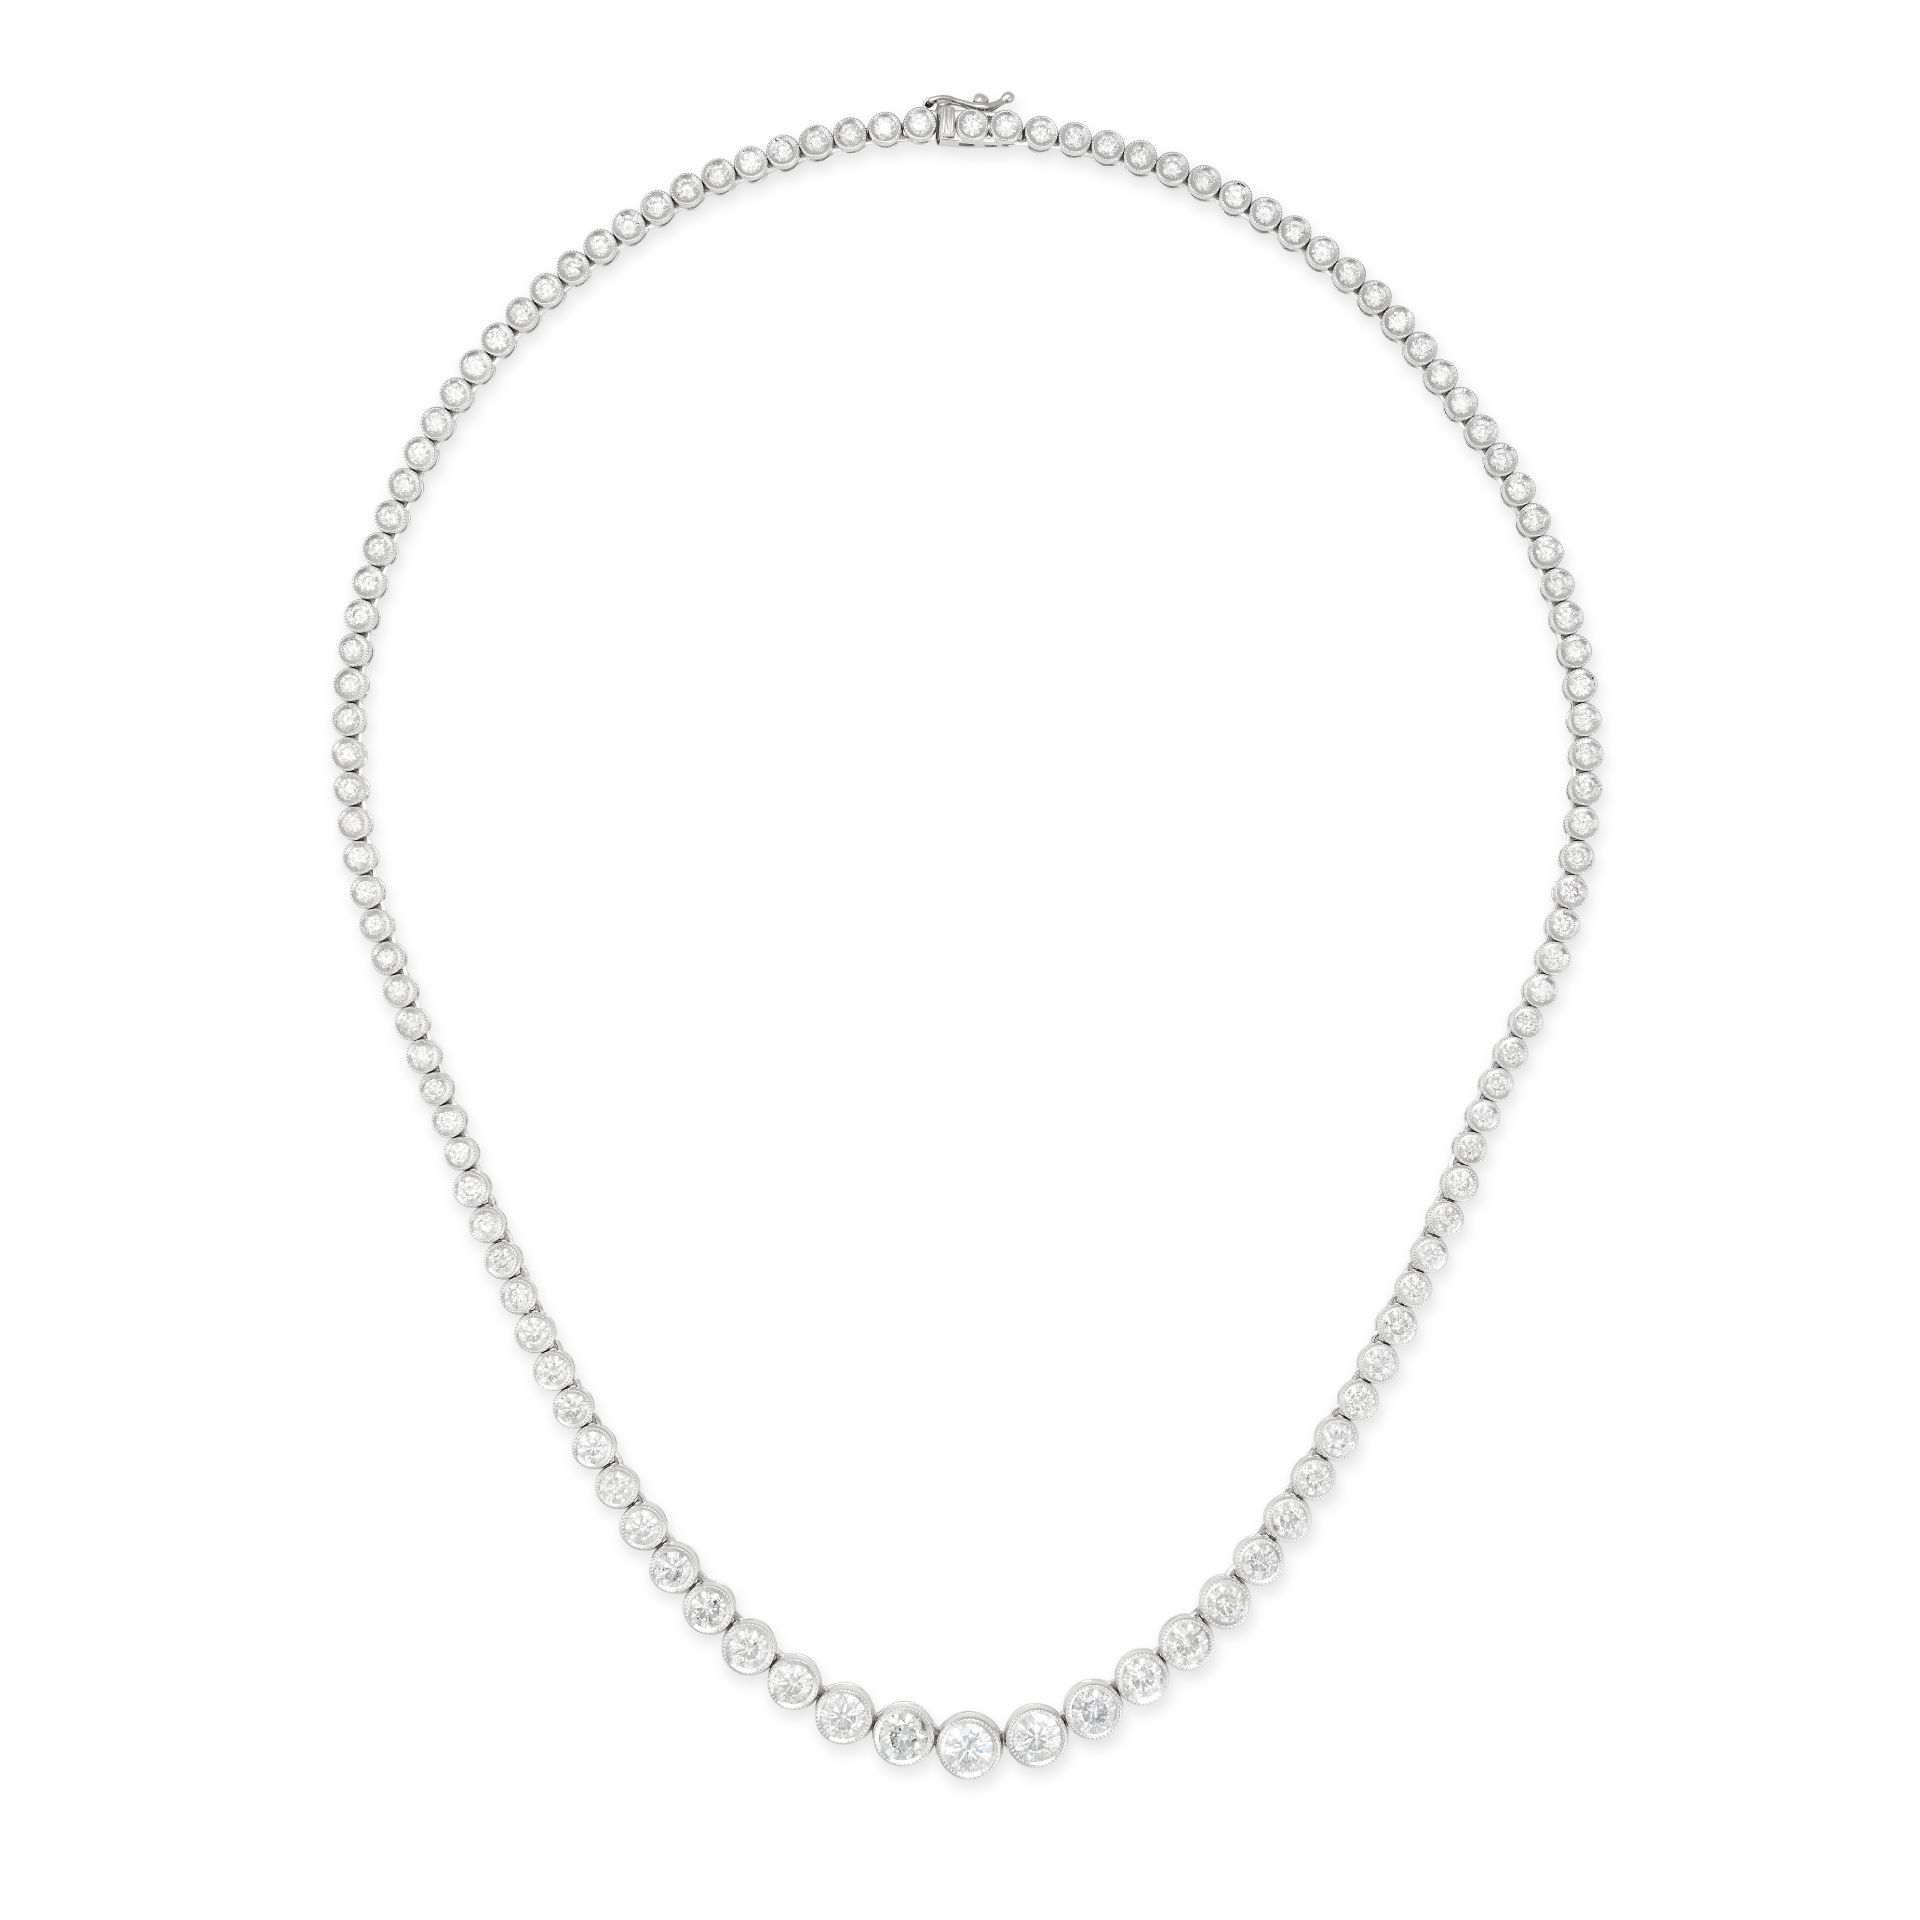 A DIAMOND RIVIERE NECKLACE in 18ct white gold, comprising a row of graduating bezel set round bri...